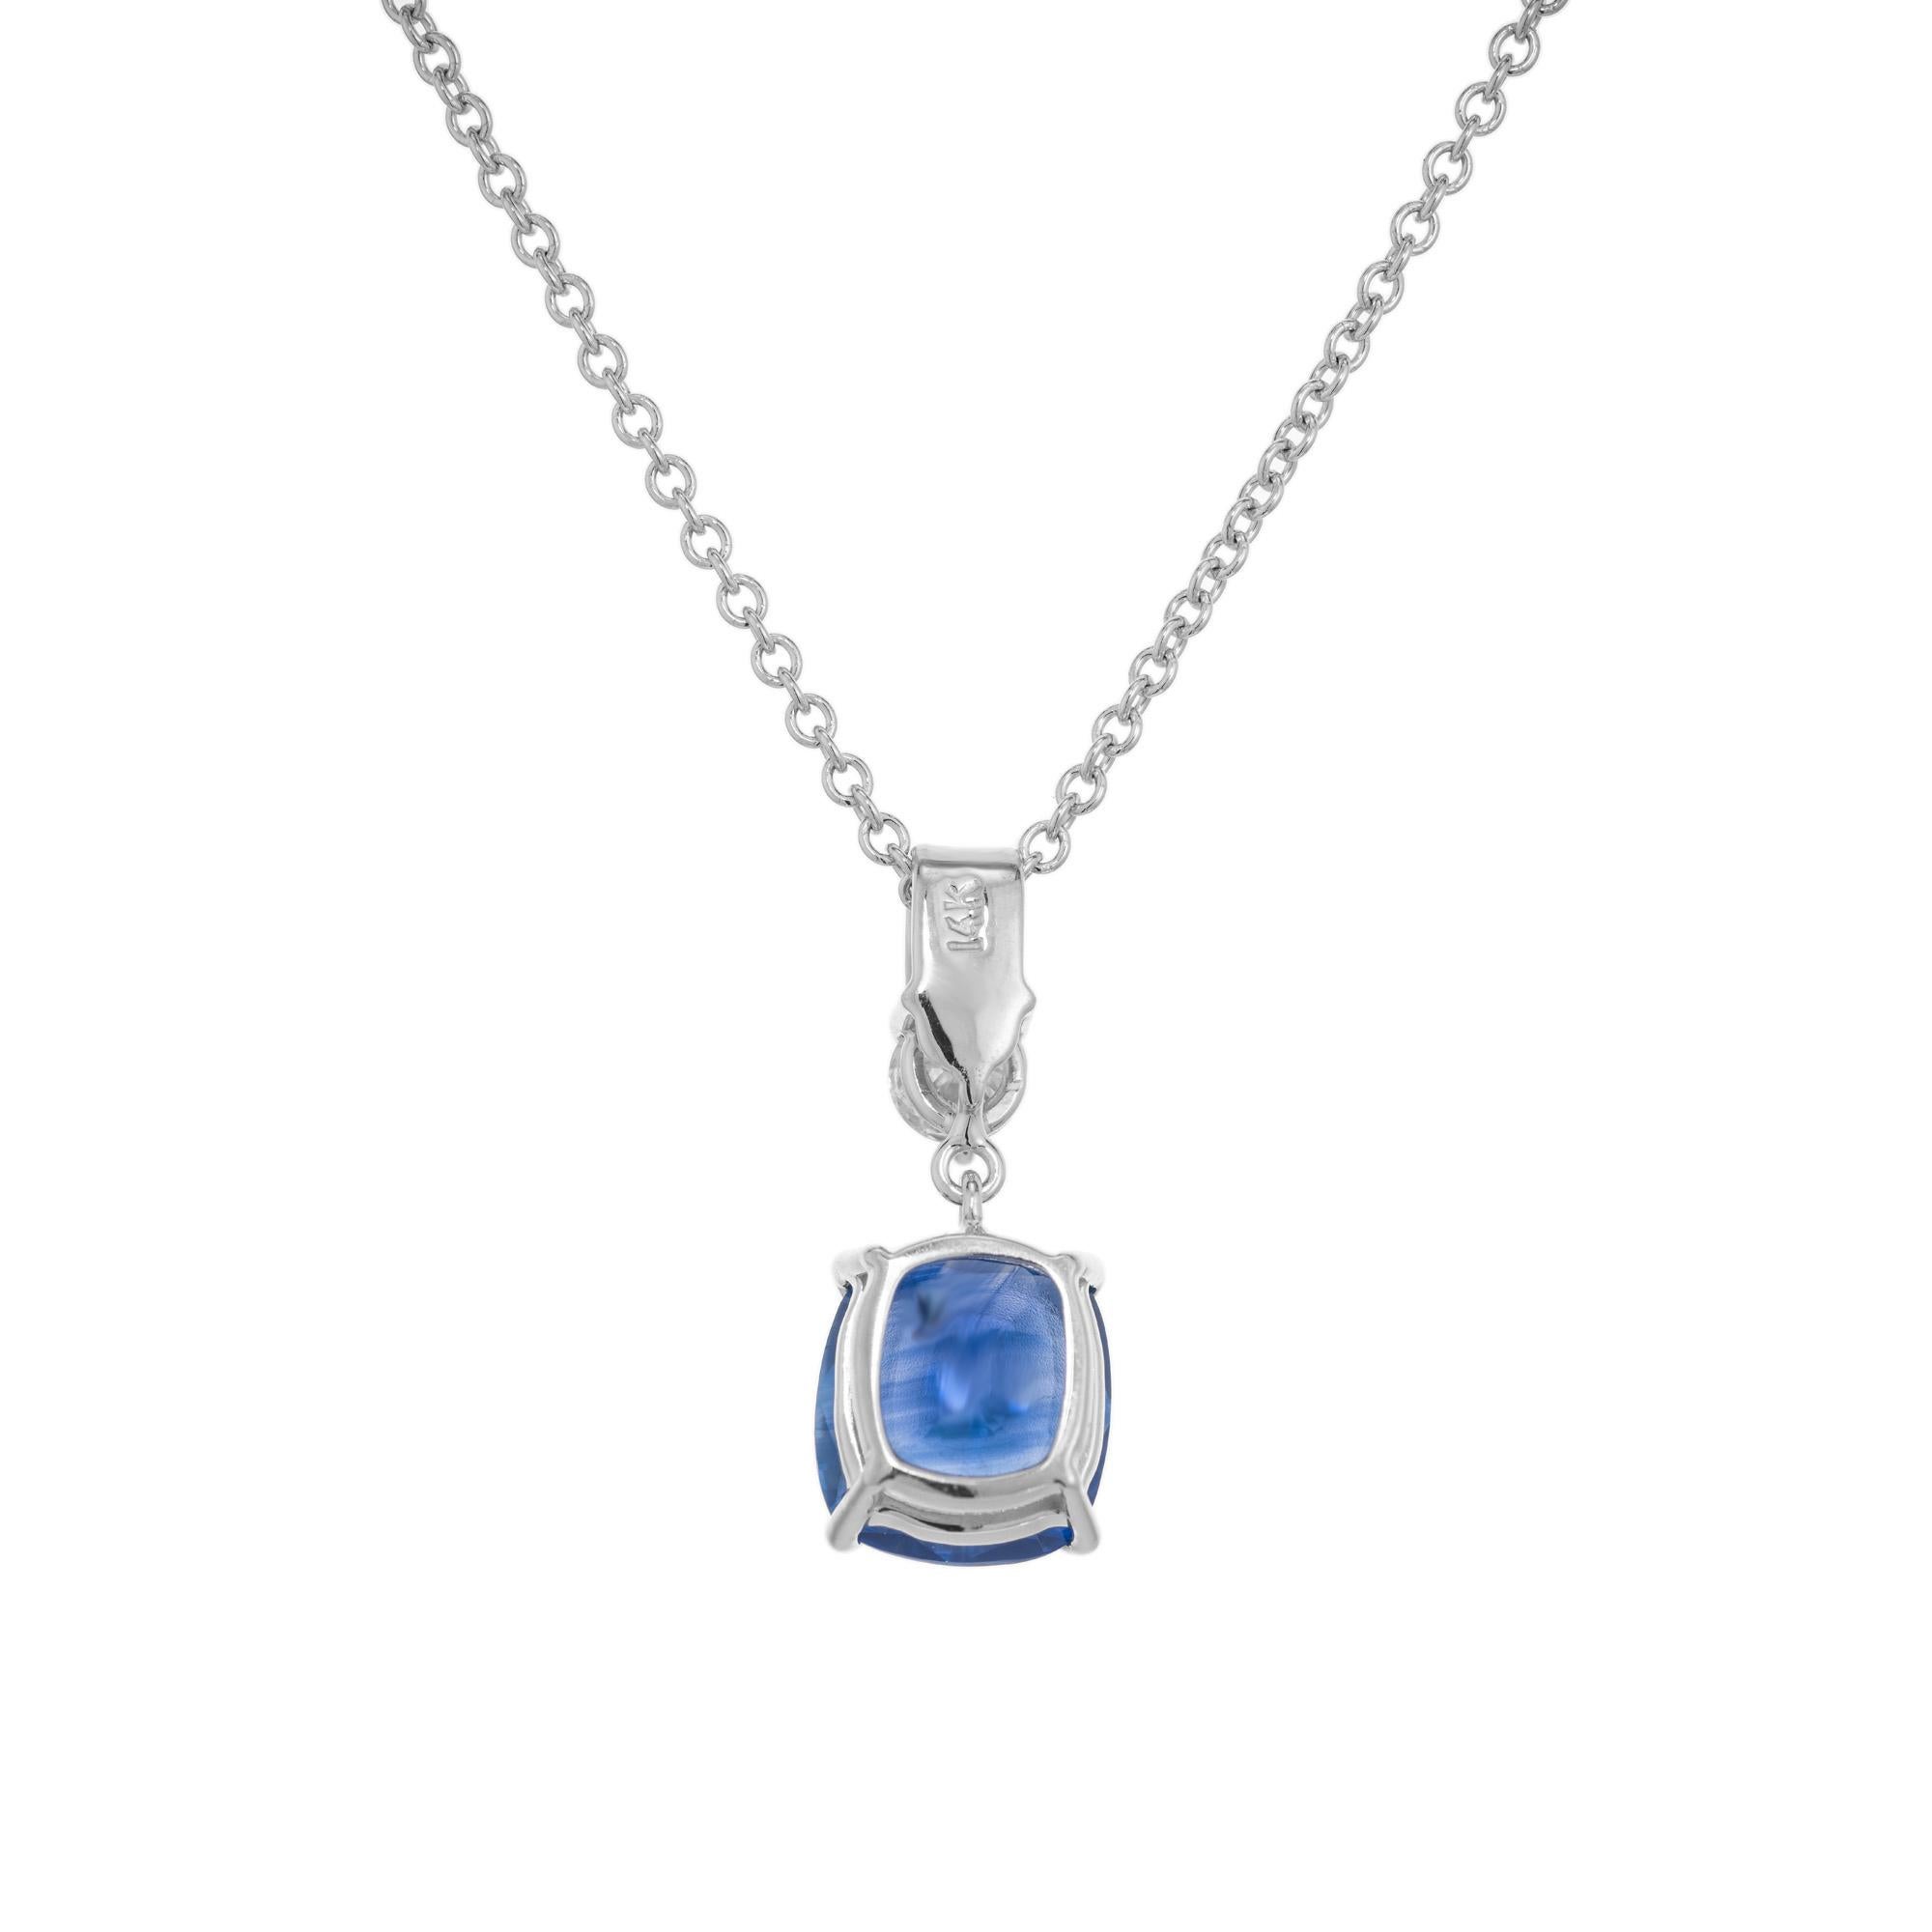 Women's Peter Suchy GIA Certified 1.95 Carat Sapphire Diamond Pendant Necklace  For Sale